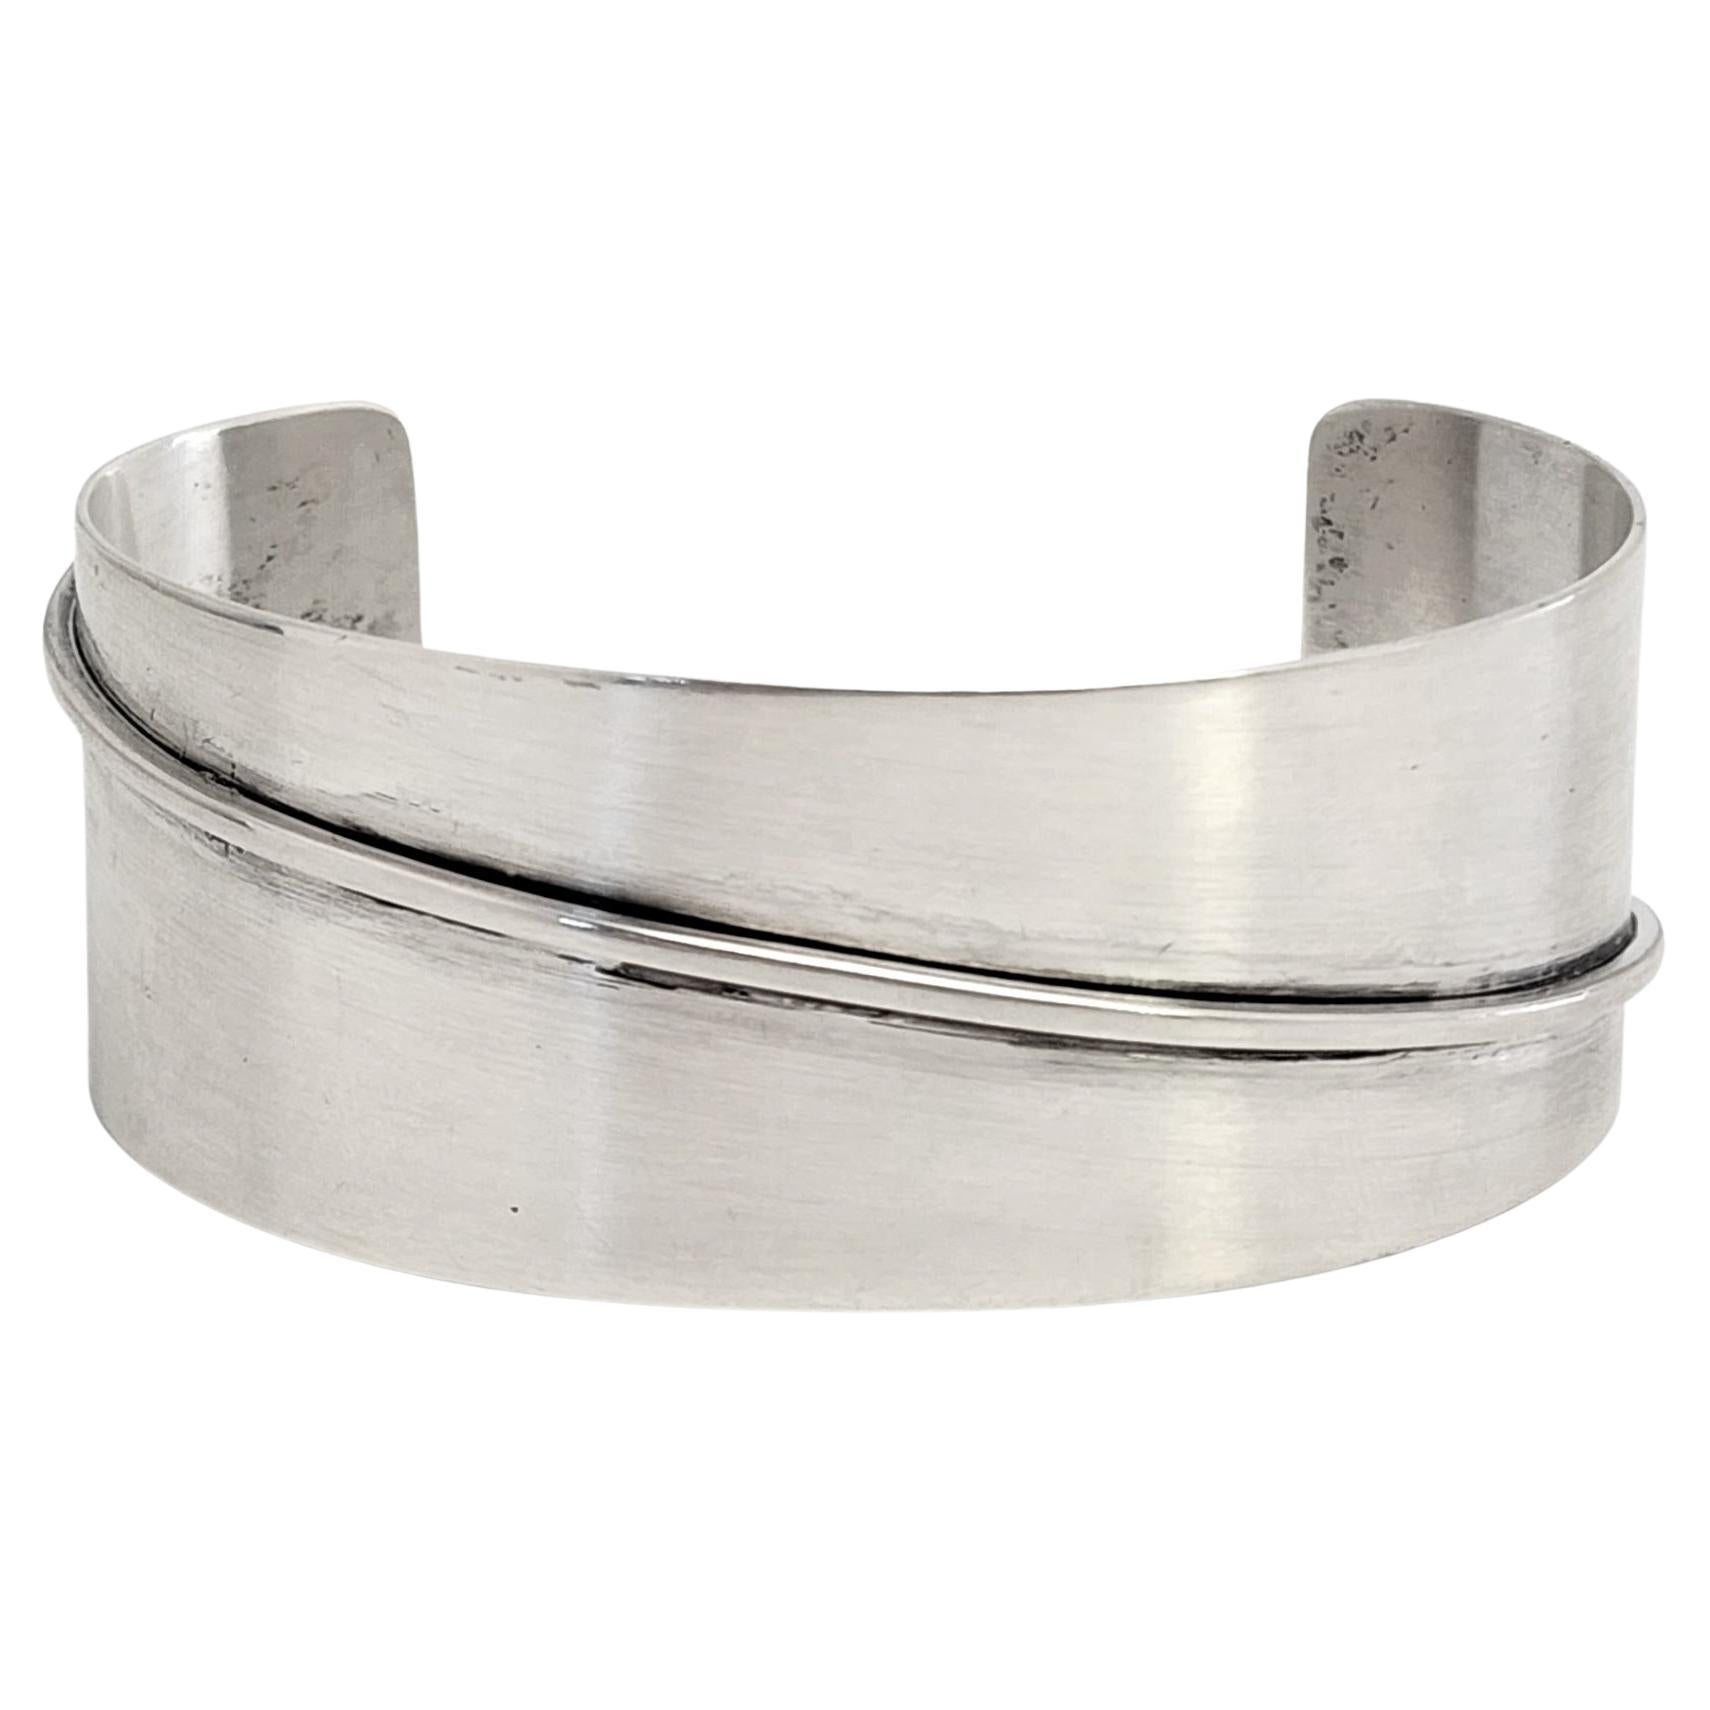 Orb Otto Robert Bade Sterling Silver Modern Cuff Bracelet #13274 For Sale